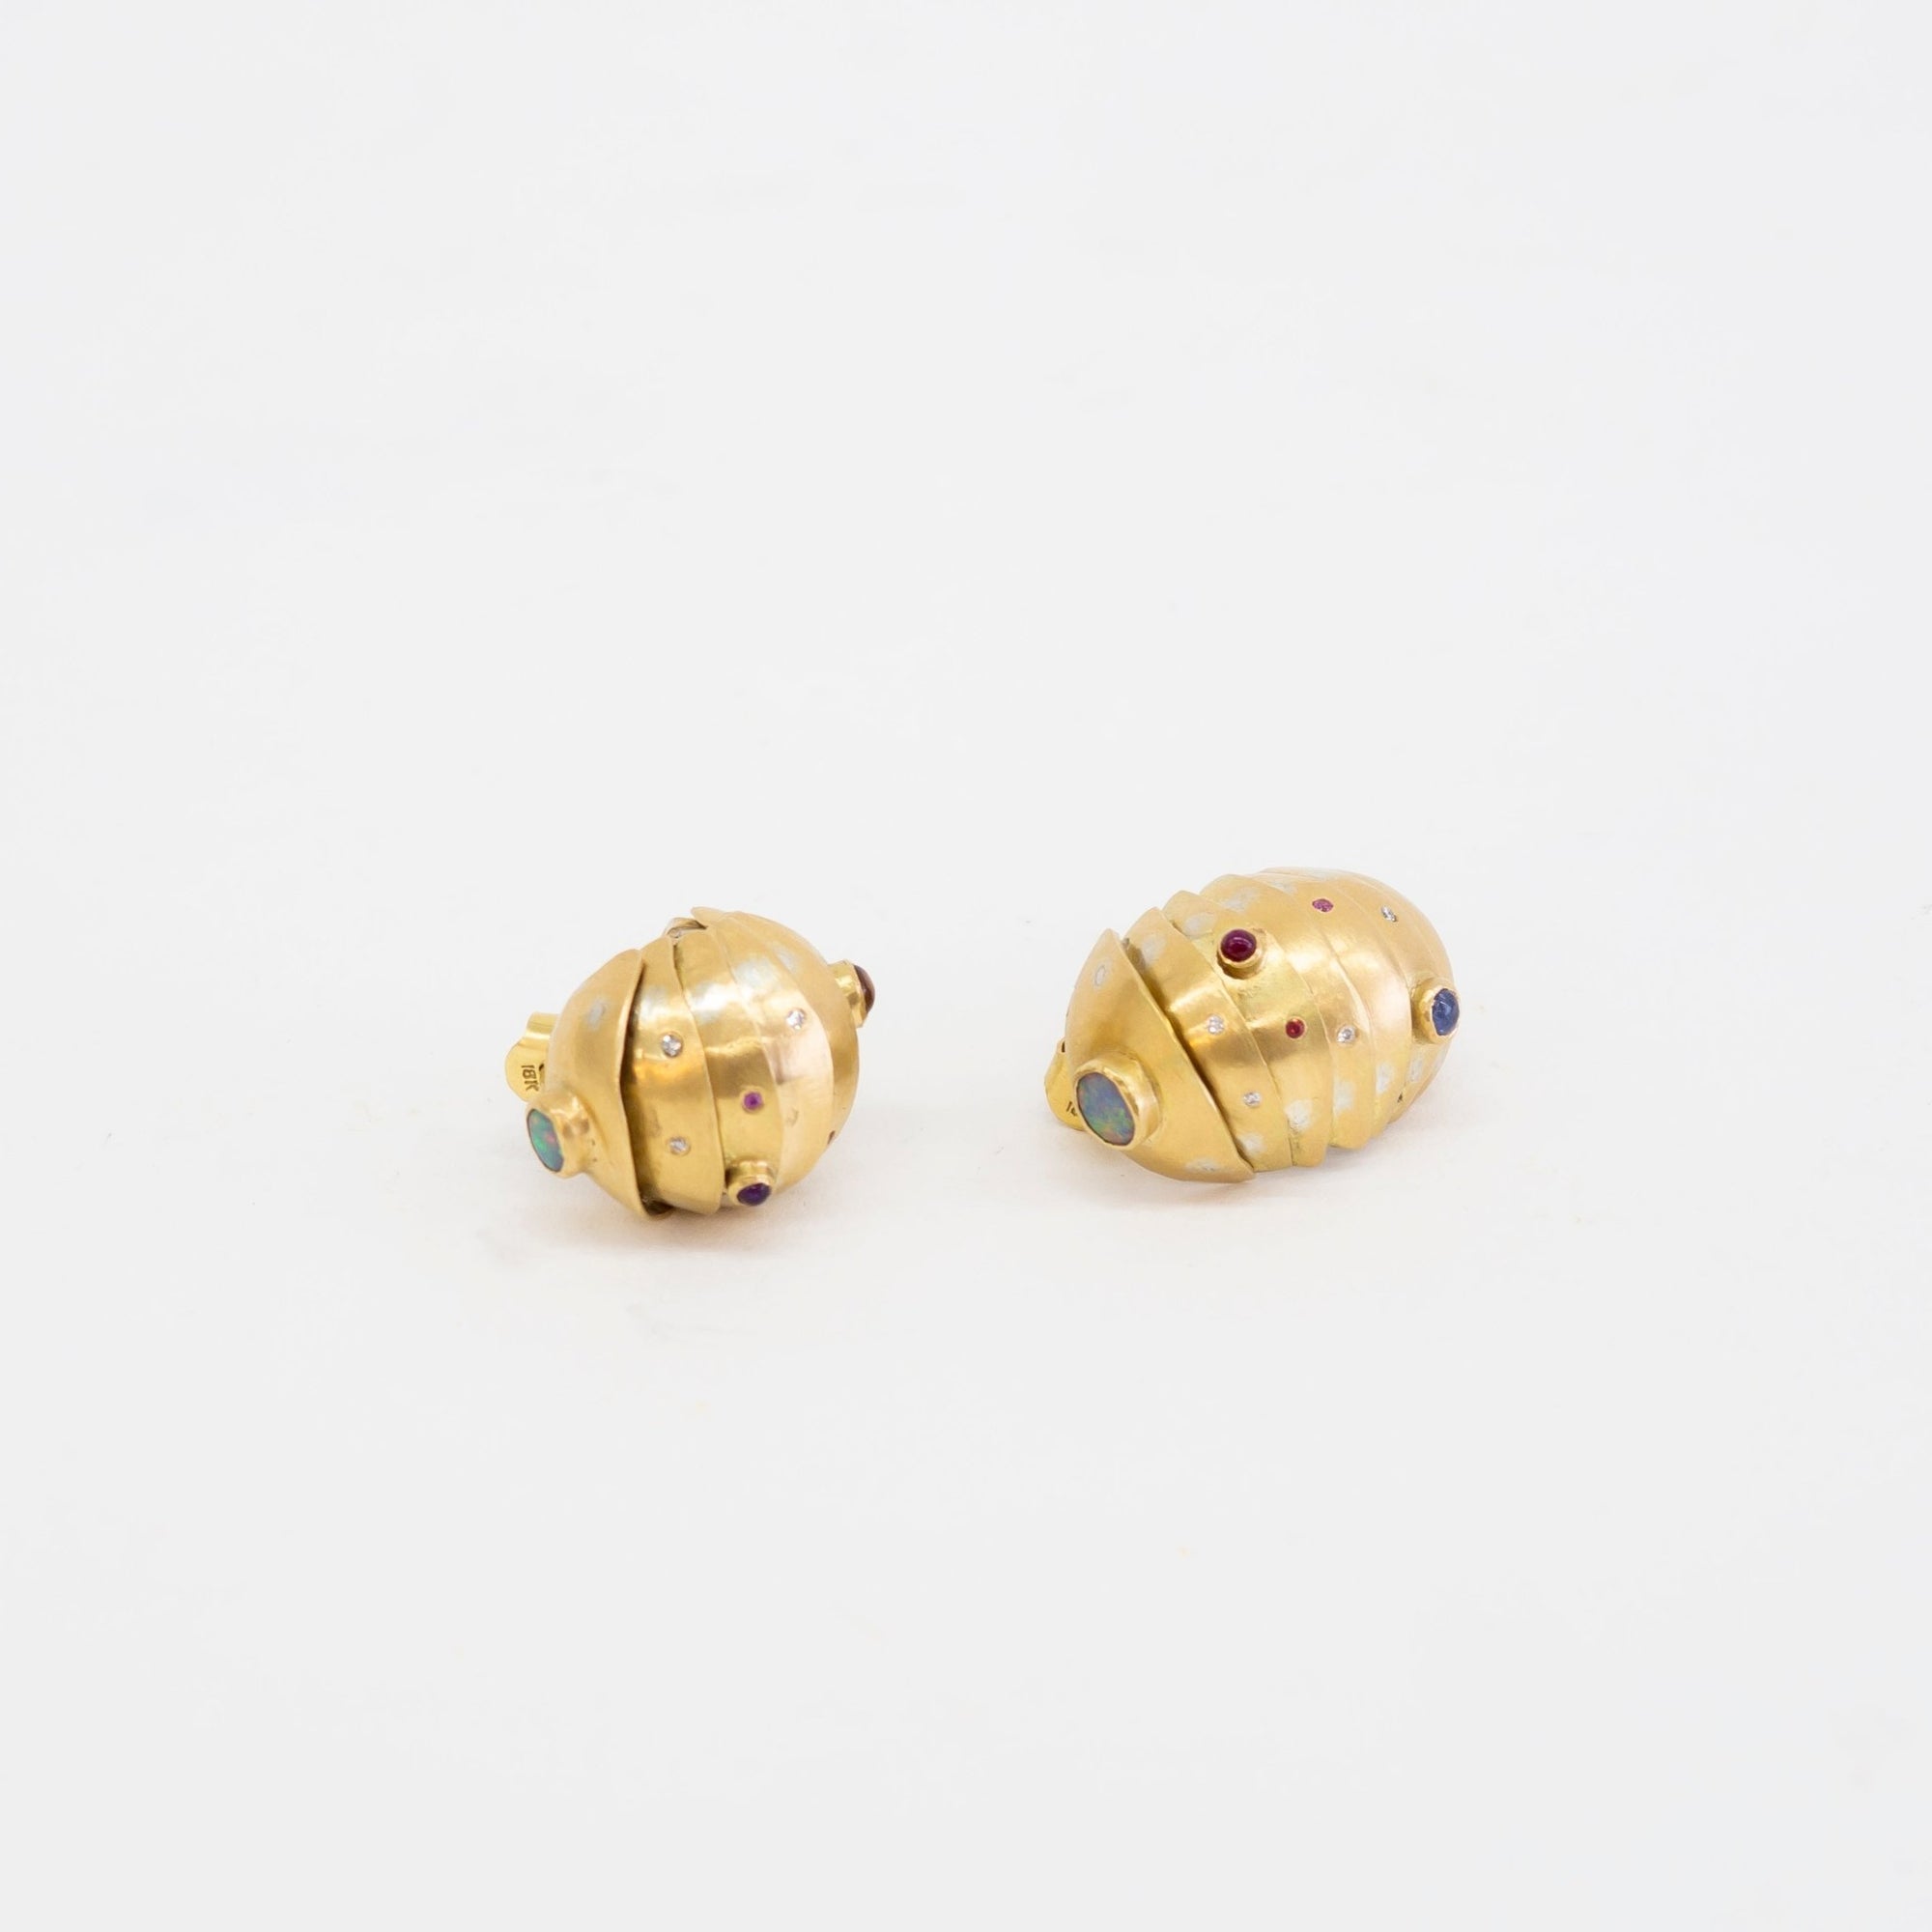 Black Barc 'Roly-Poly' Earrings No. 2 & No 3. (sold as a pair) | Tortoise General Store